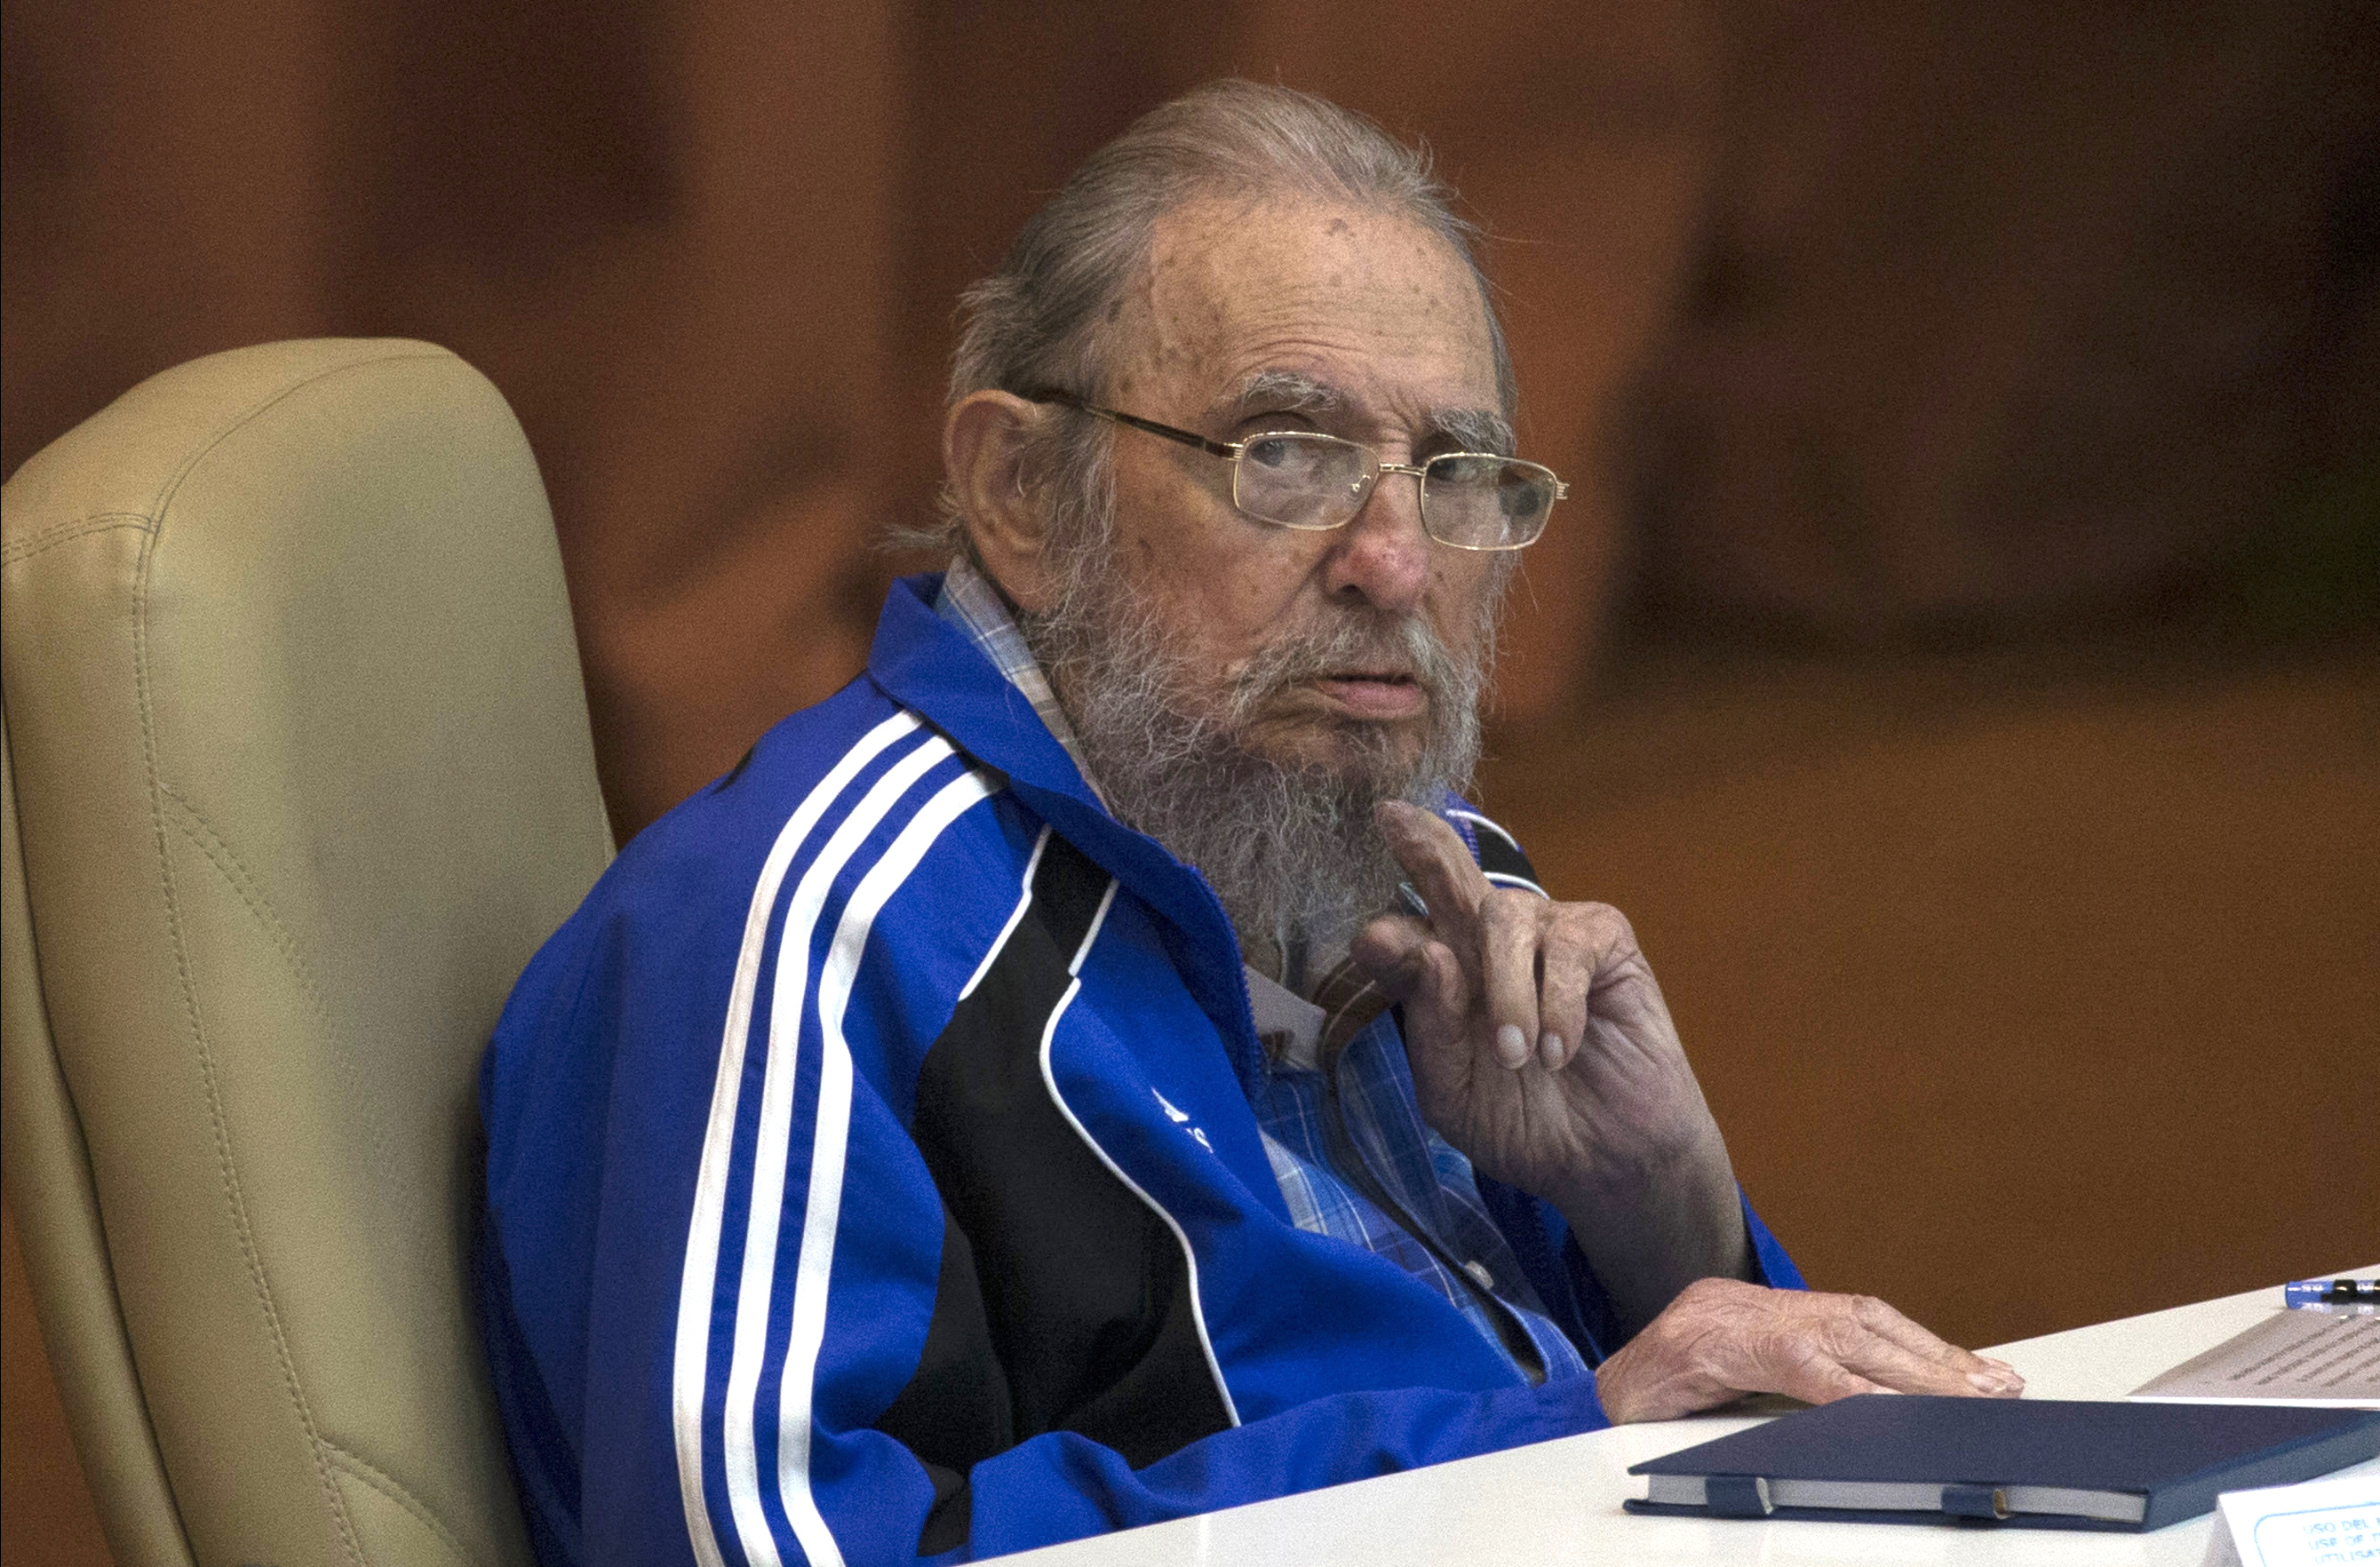 FILE - In this April 19, 2016 file photo, Fidel Castro attends the last day of the 7th Cuban Communist Party Congress in Havana, Cuba. Fidel Castro formally stepped down in 2008 after suffering gastrointestinal ailments and public appearances have been increasingly unusual in recent years. Cuban President Raul Castro has announced the death of his brother Fidel Castro at age 90 on Cuban state media on Friday, Nov. 25, 2016. (Ismael Francisco/Cubadebate via AP, File)